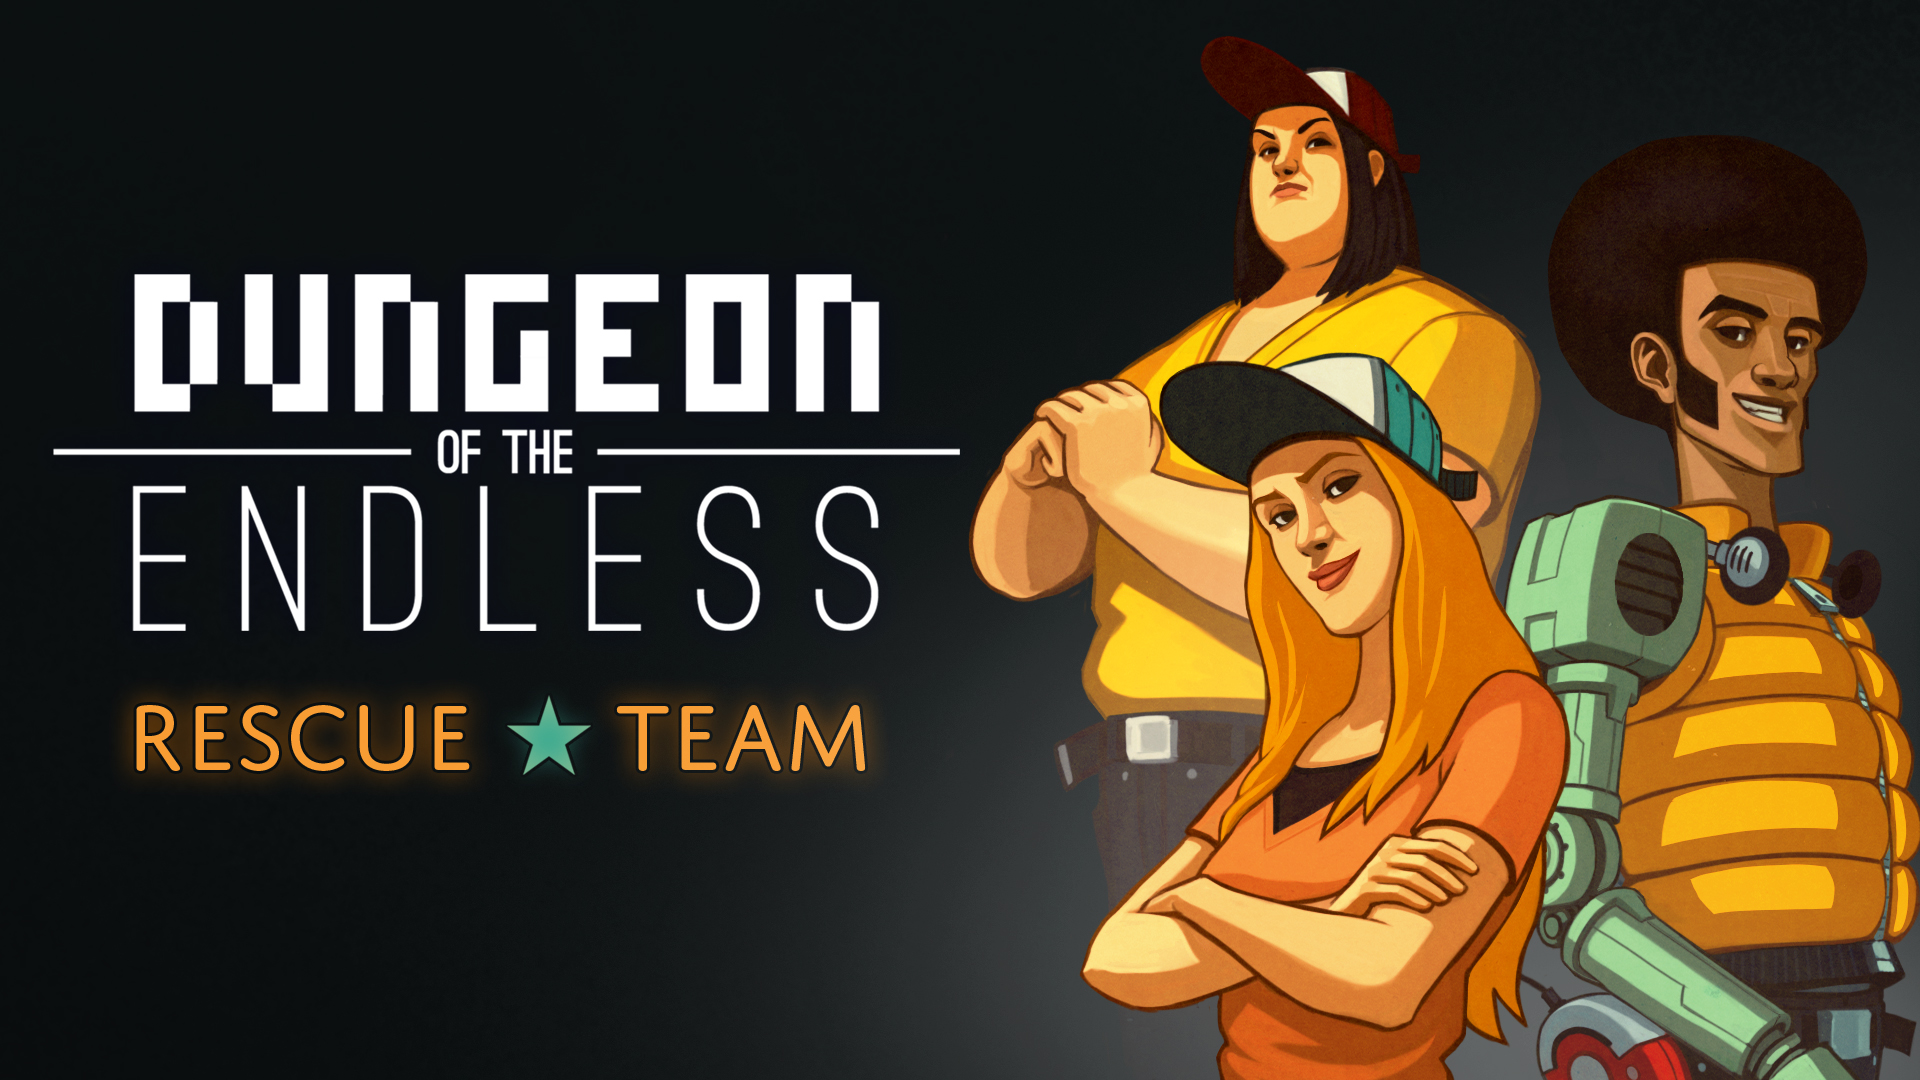 Dungeon of the ENDLESS - Rescue Team Add-on screenshot